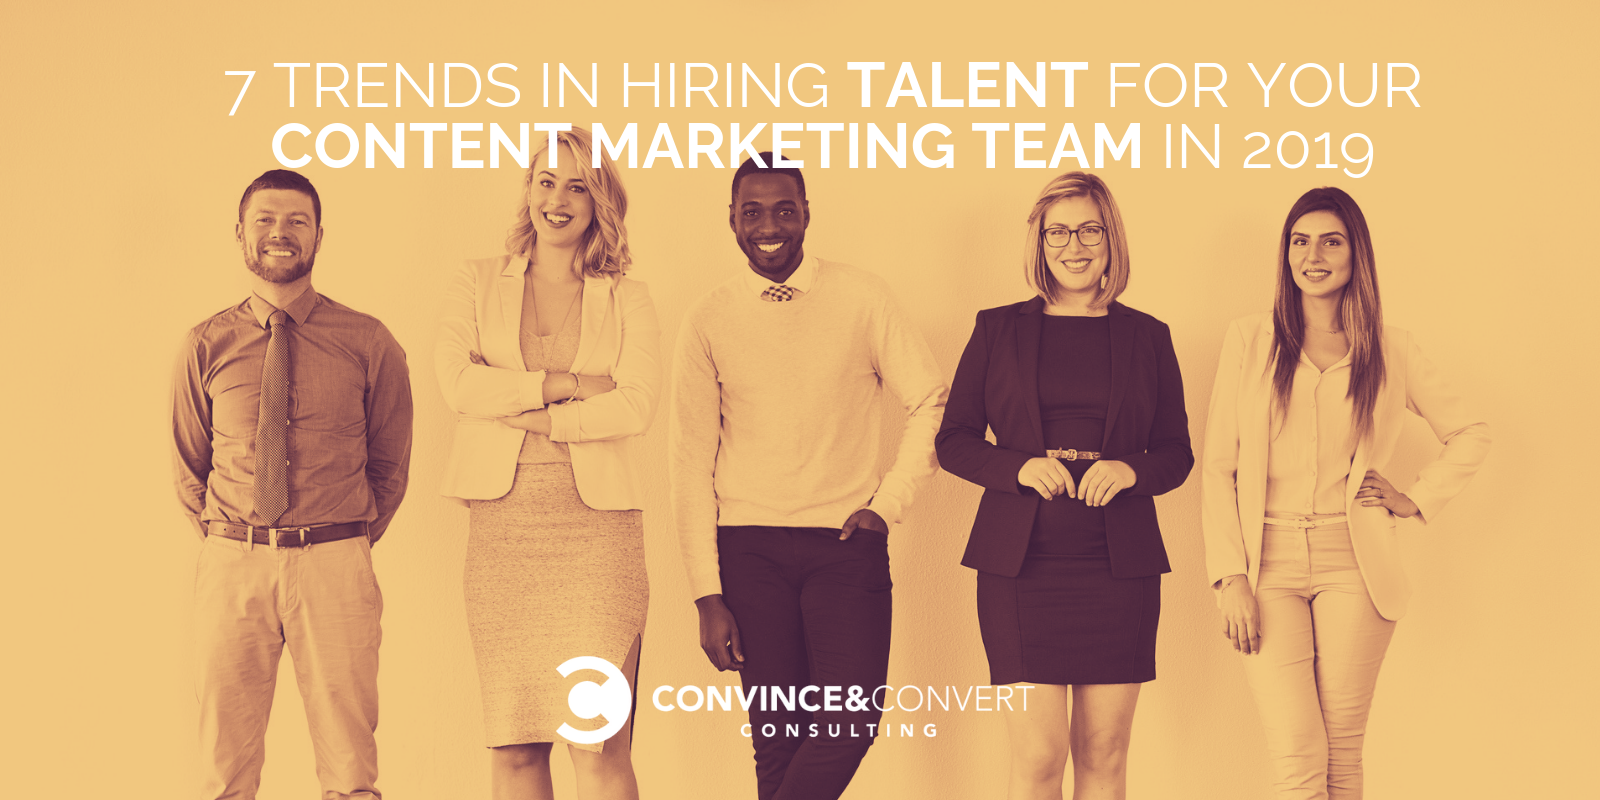 7 Trends in Hiring Talent for Your Content Marketing Team in 2019